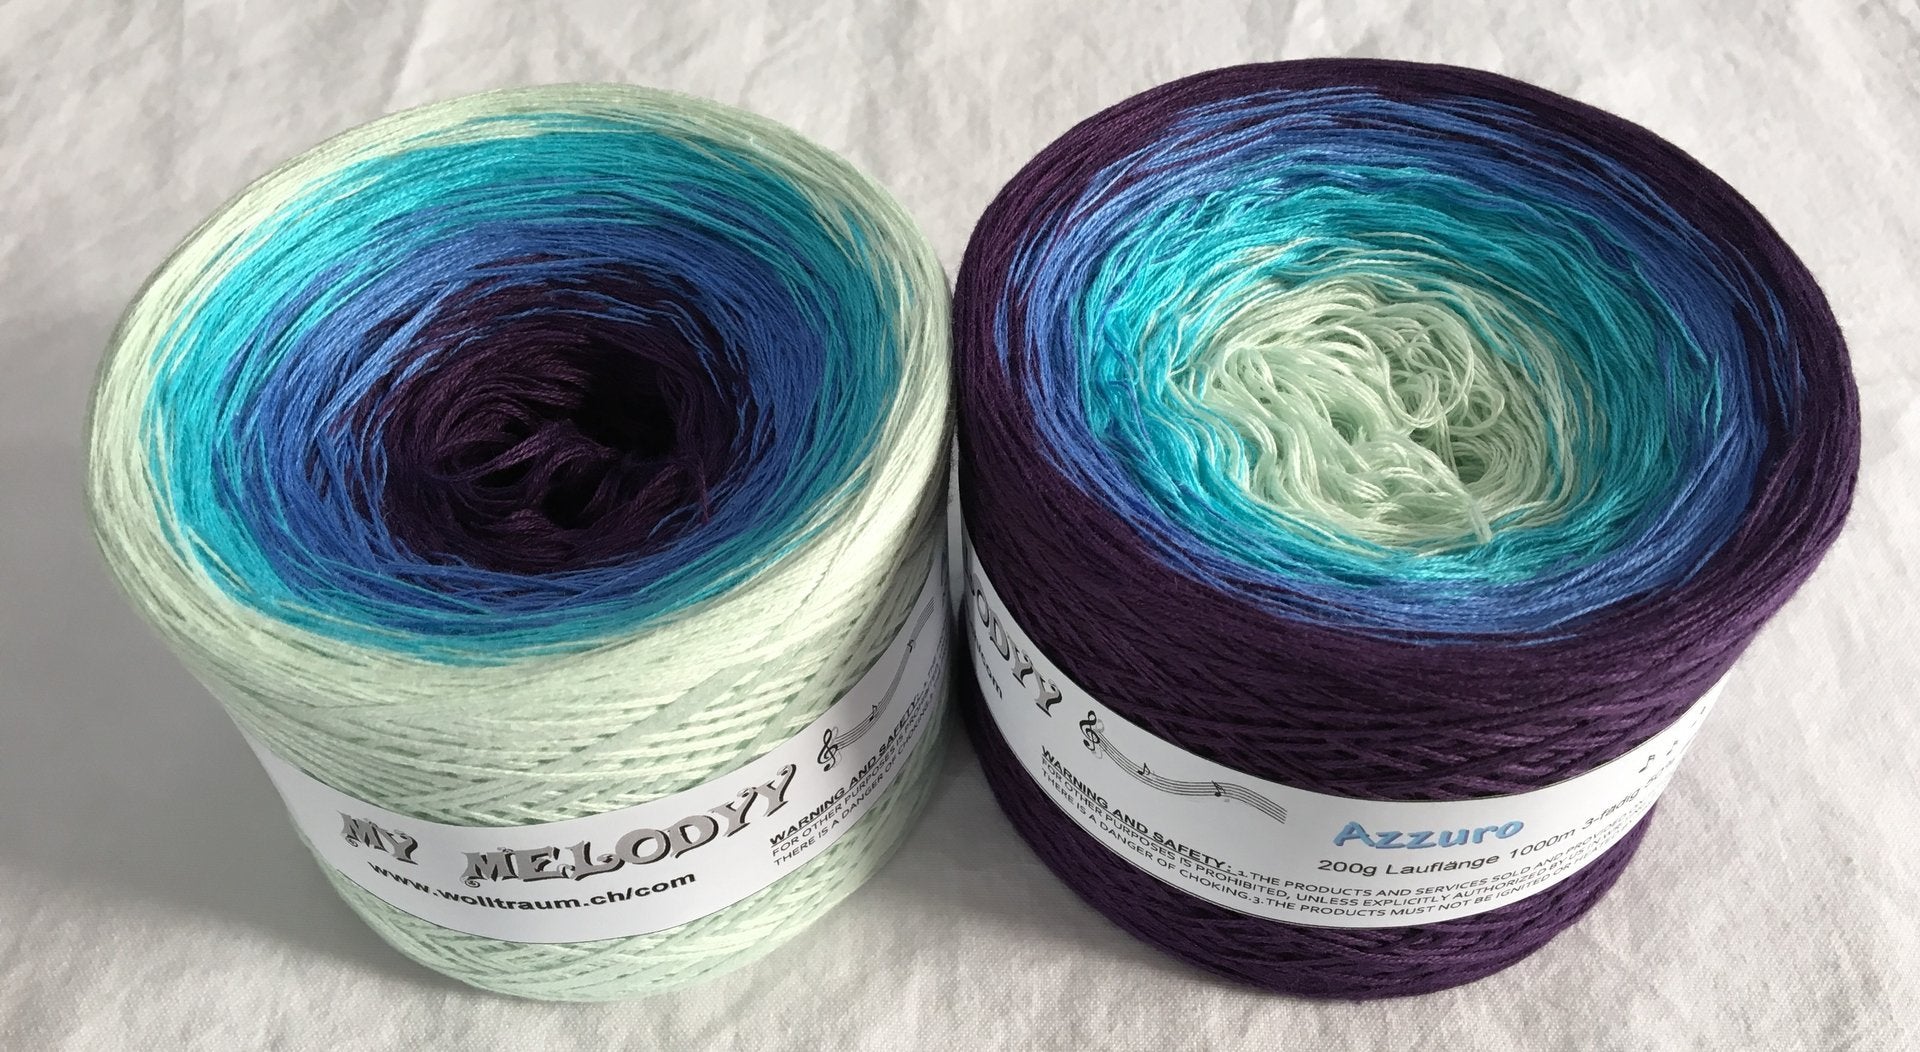 The Wolltraum My Melodyy gradient yarn colourway Azzuro.  This cake has an ombre effect that goes from light green to dark blue.